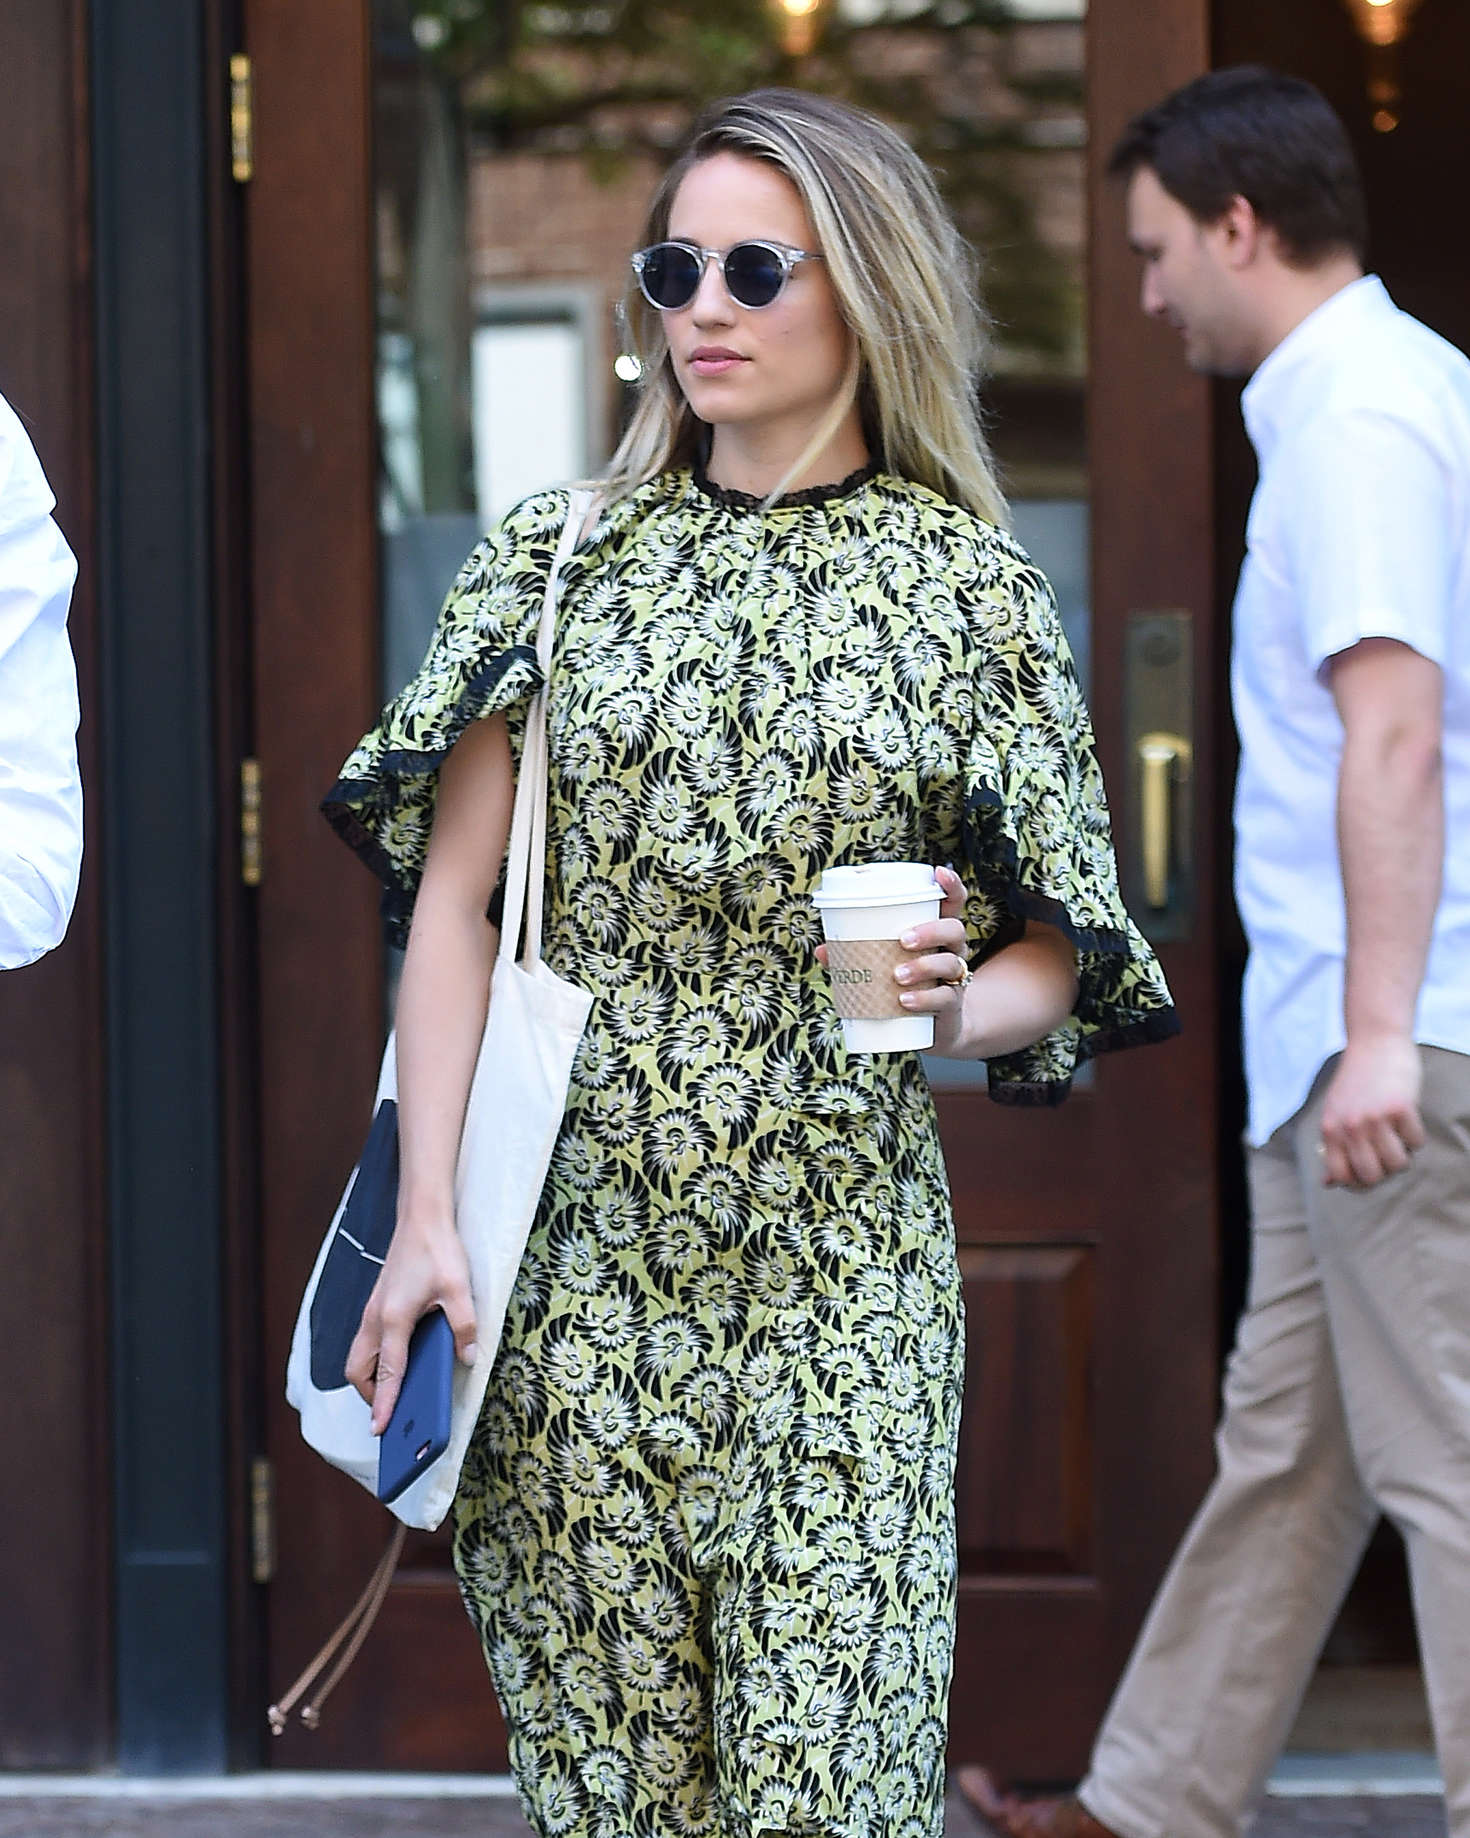 Dianna Agron - Out and about in NYC